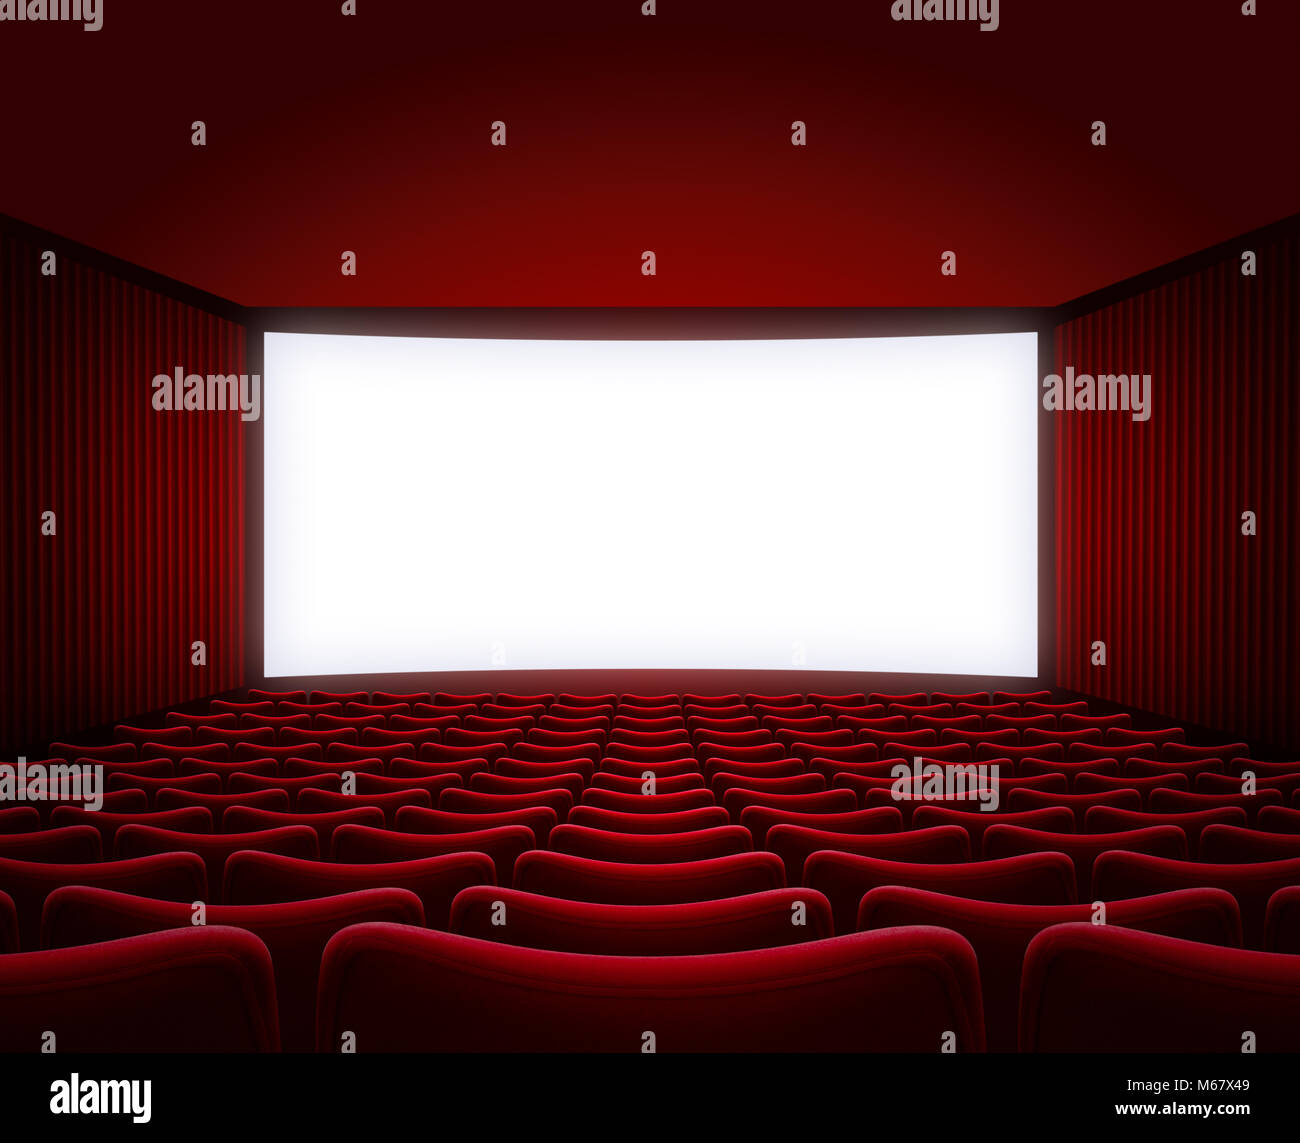 movie theater hall with red seats interior 3d illustration Stock Photo